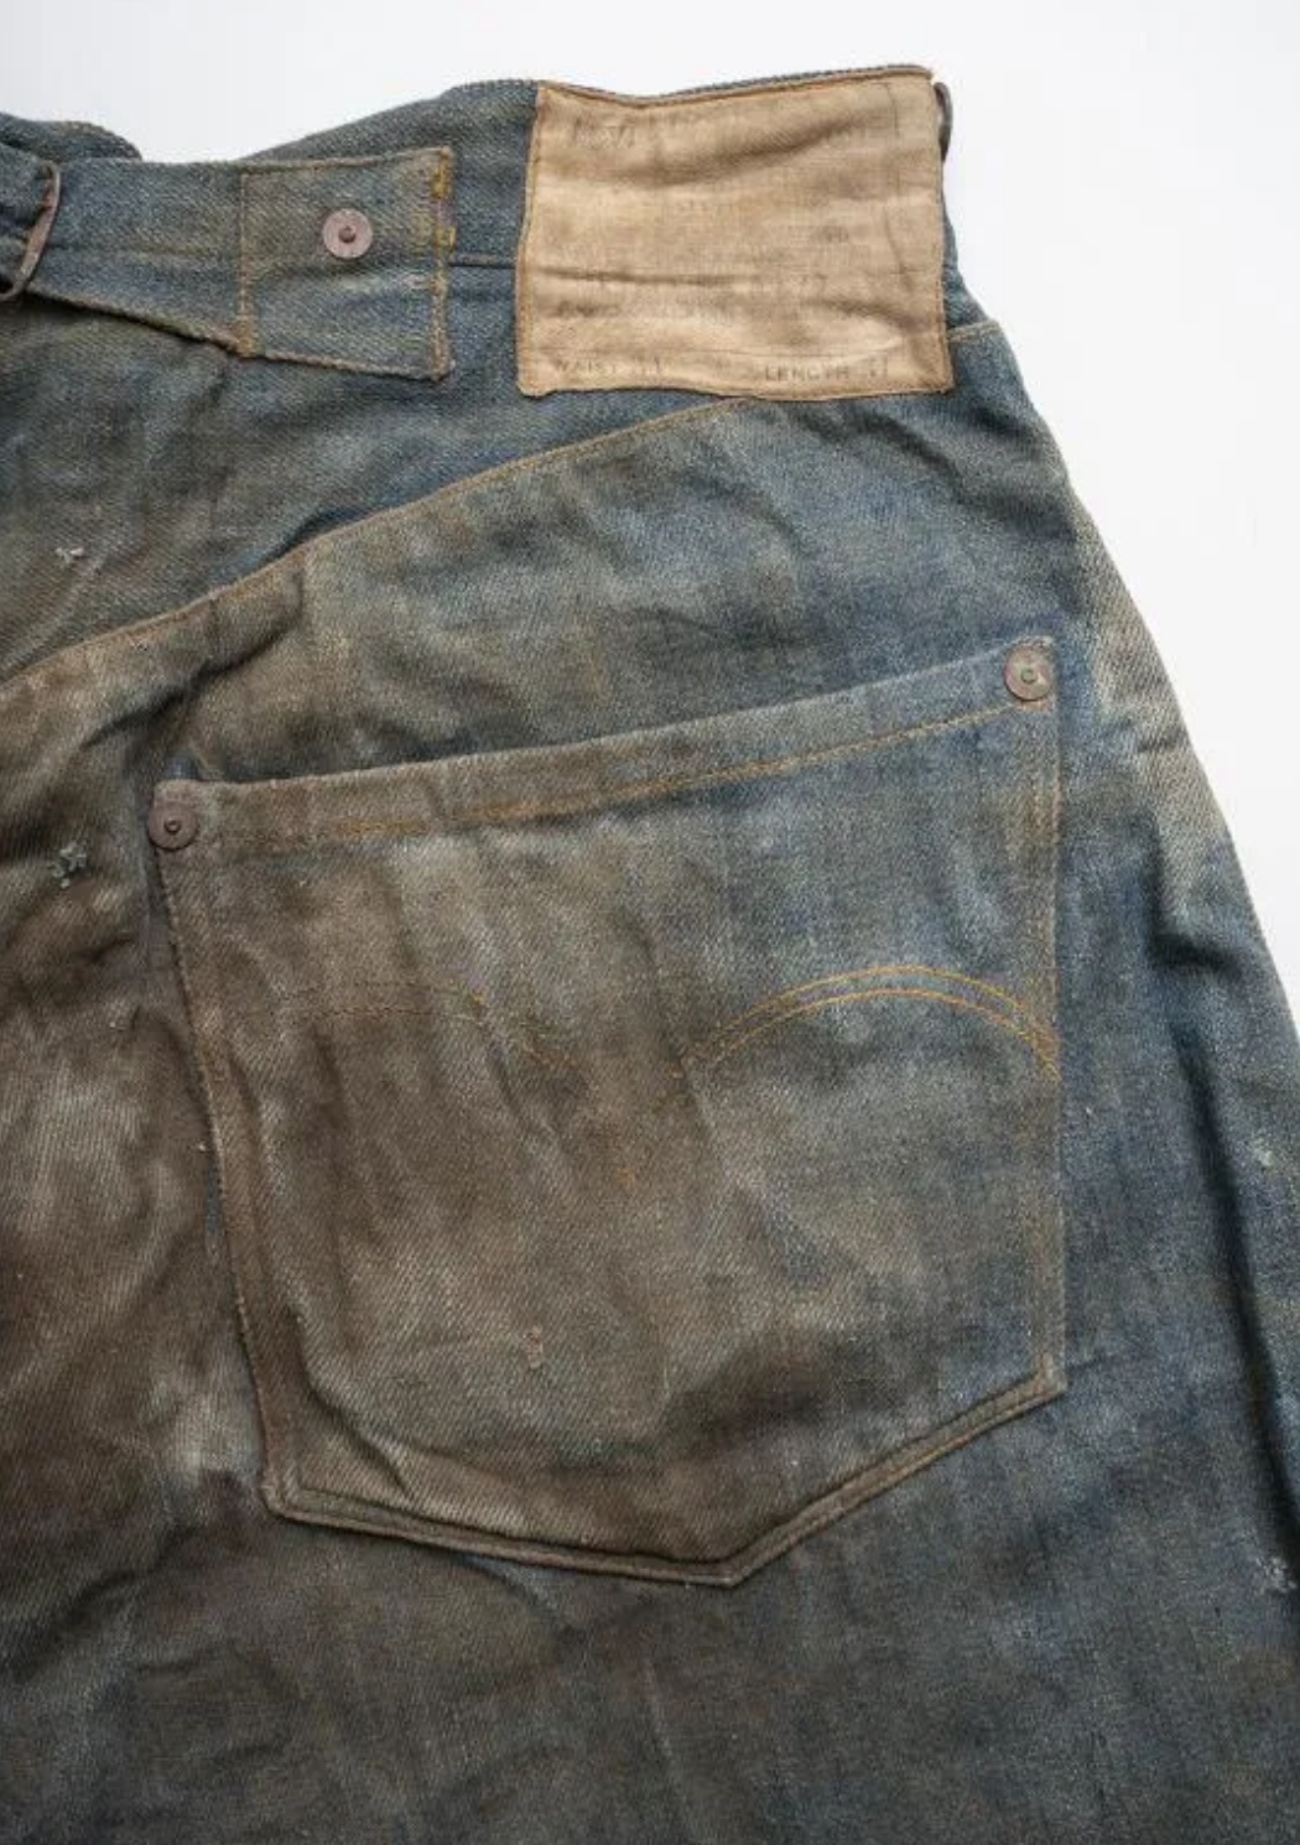 Levi’s from 19th Century Auctioned for Record Price | Dusty Old Thing